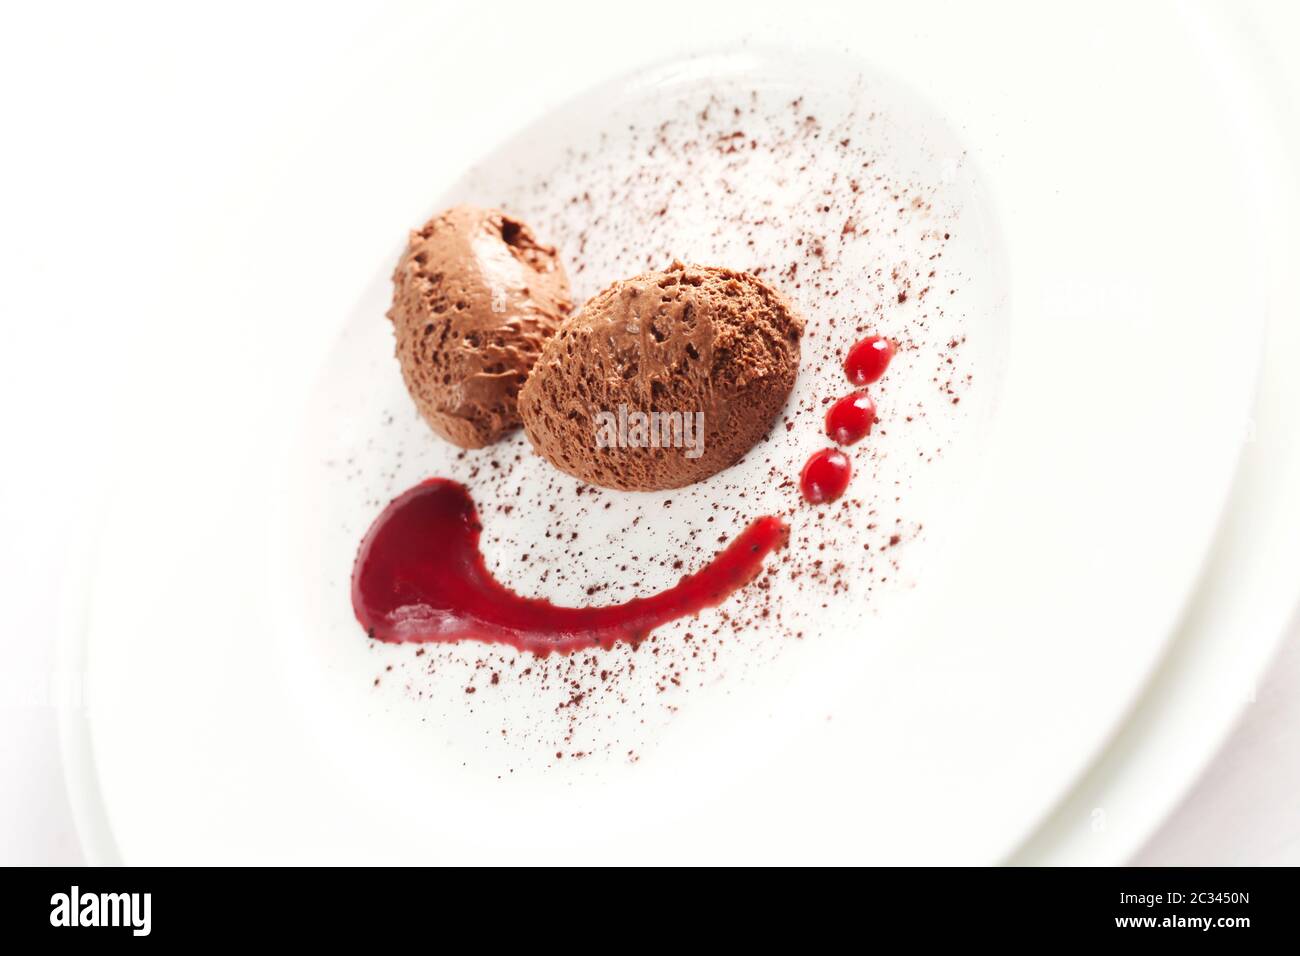 Chocolate Mousse With Fruit Sauce Stock Photo